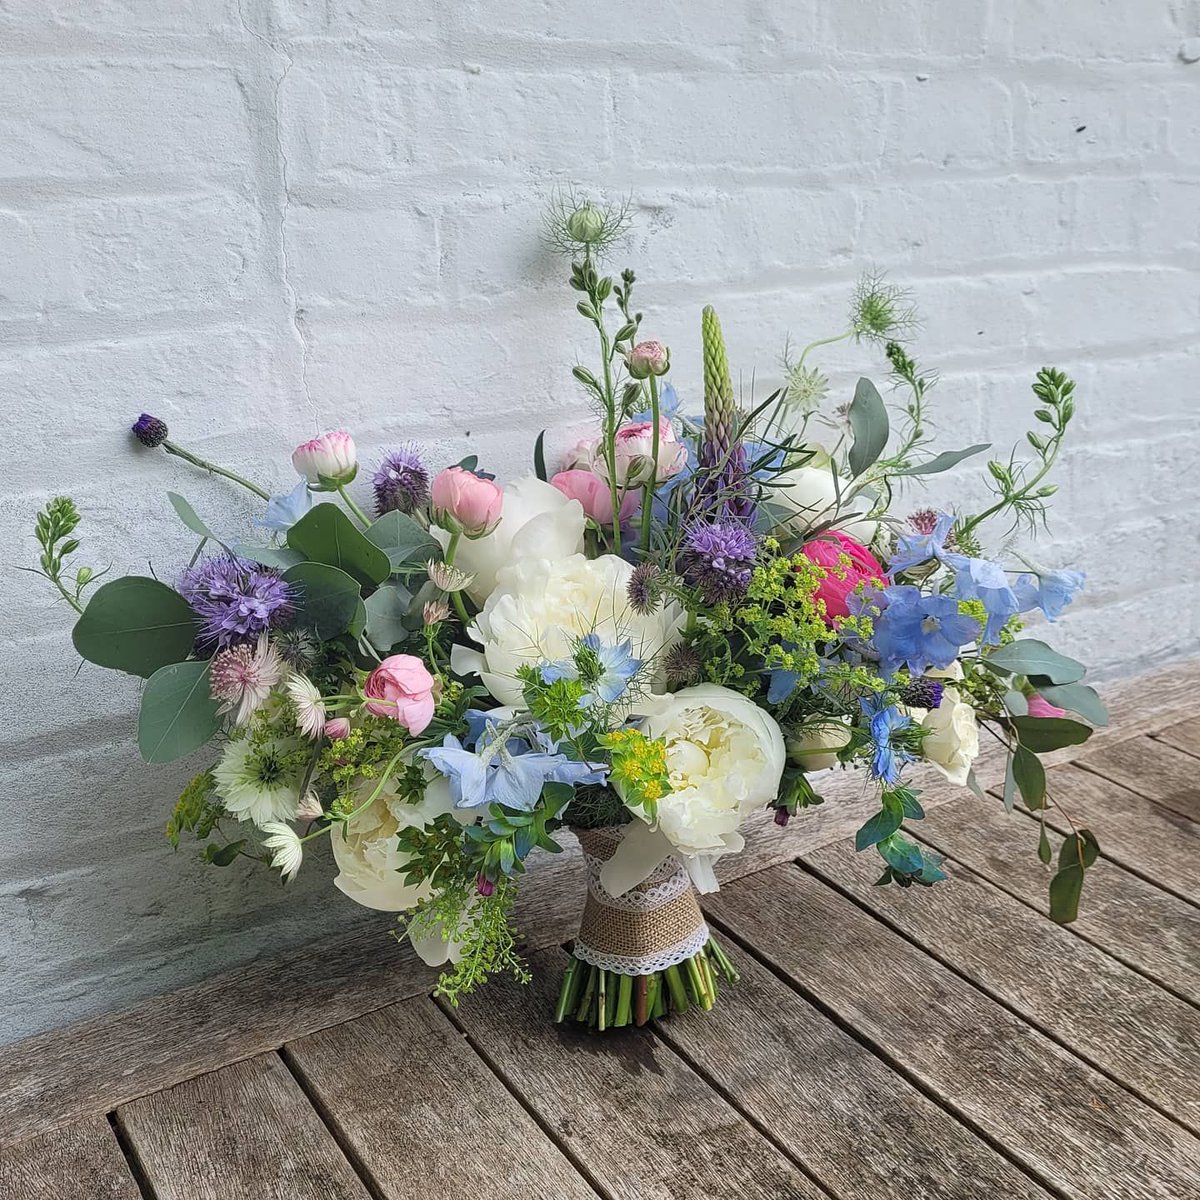 Wild and Wonderful 🌸🌼🌺  
⭐️ Wedding Florist ⭐️
Supplier: Wild Bloom
Find them on the Married In Kent Wedding Directory 💖
🔗 marriedinkent.co.uk/suppliers_dire…

#kentweddingflorist #kentflorist #kentflowers #kentflorists #kentweddingflowers #weddingflowers #kentwedding #kentweddings